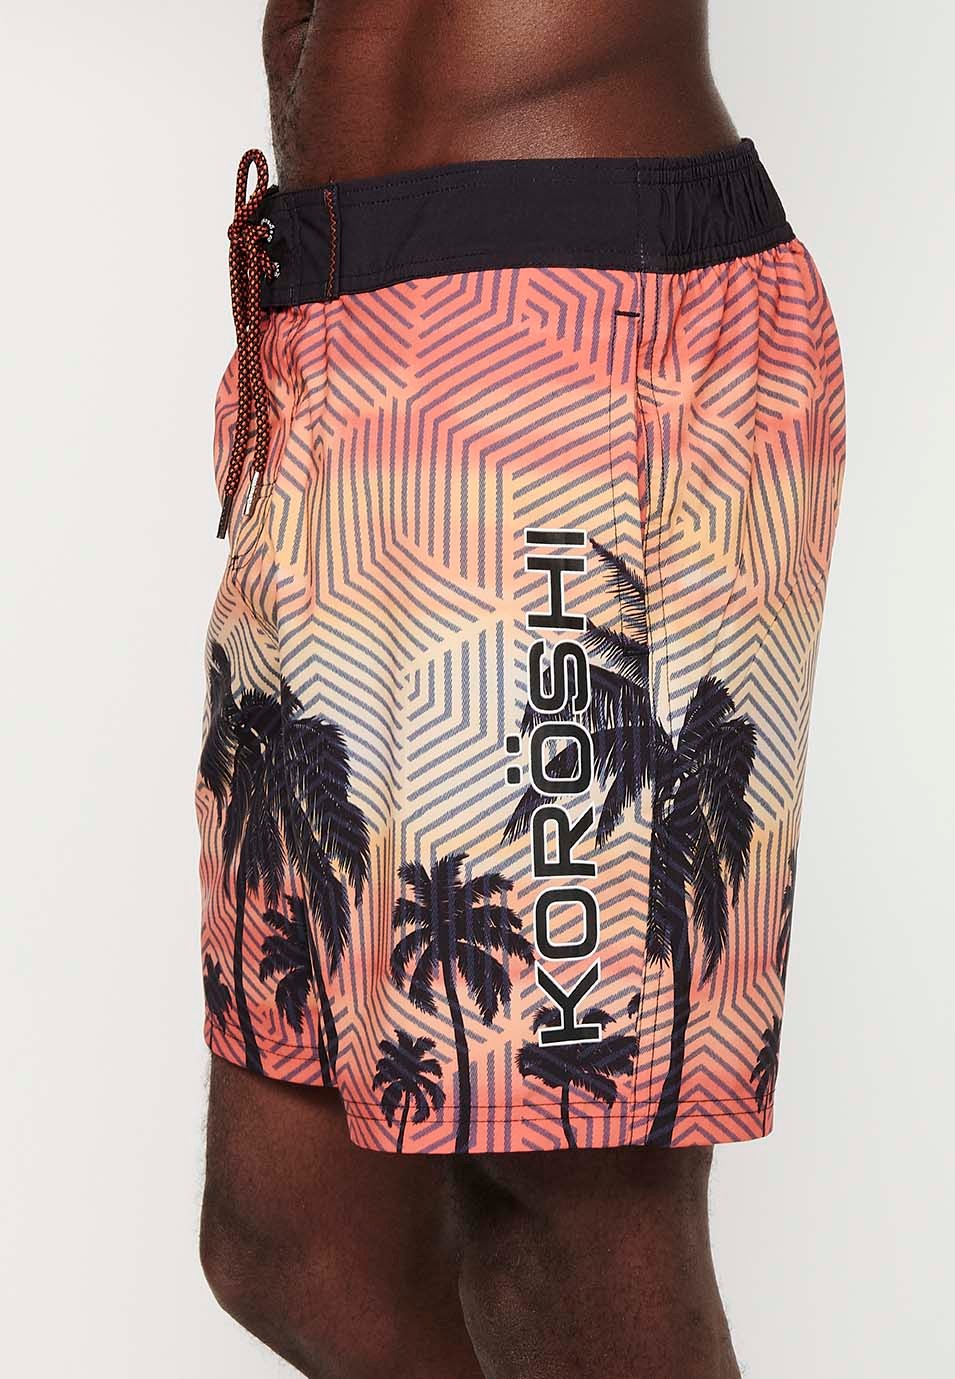 Printed swim shorts with adjustable waist, peach color for men